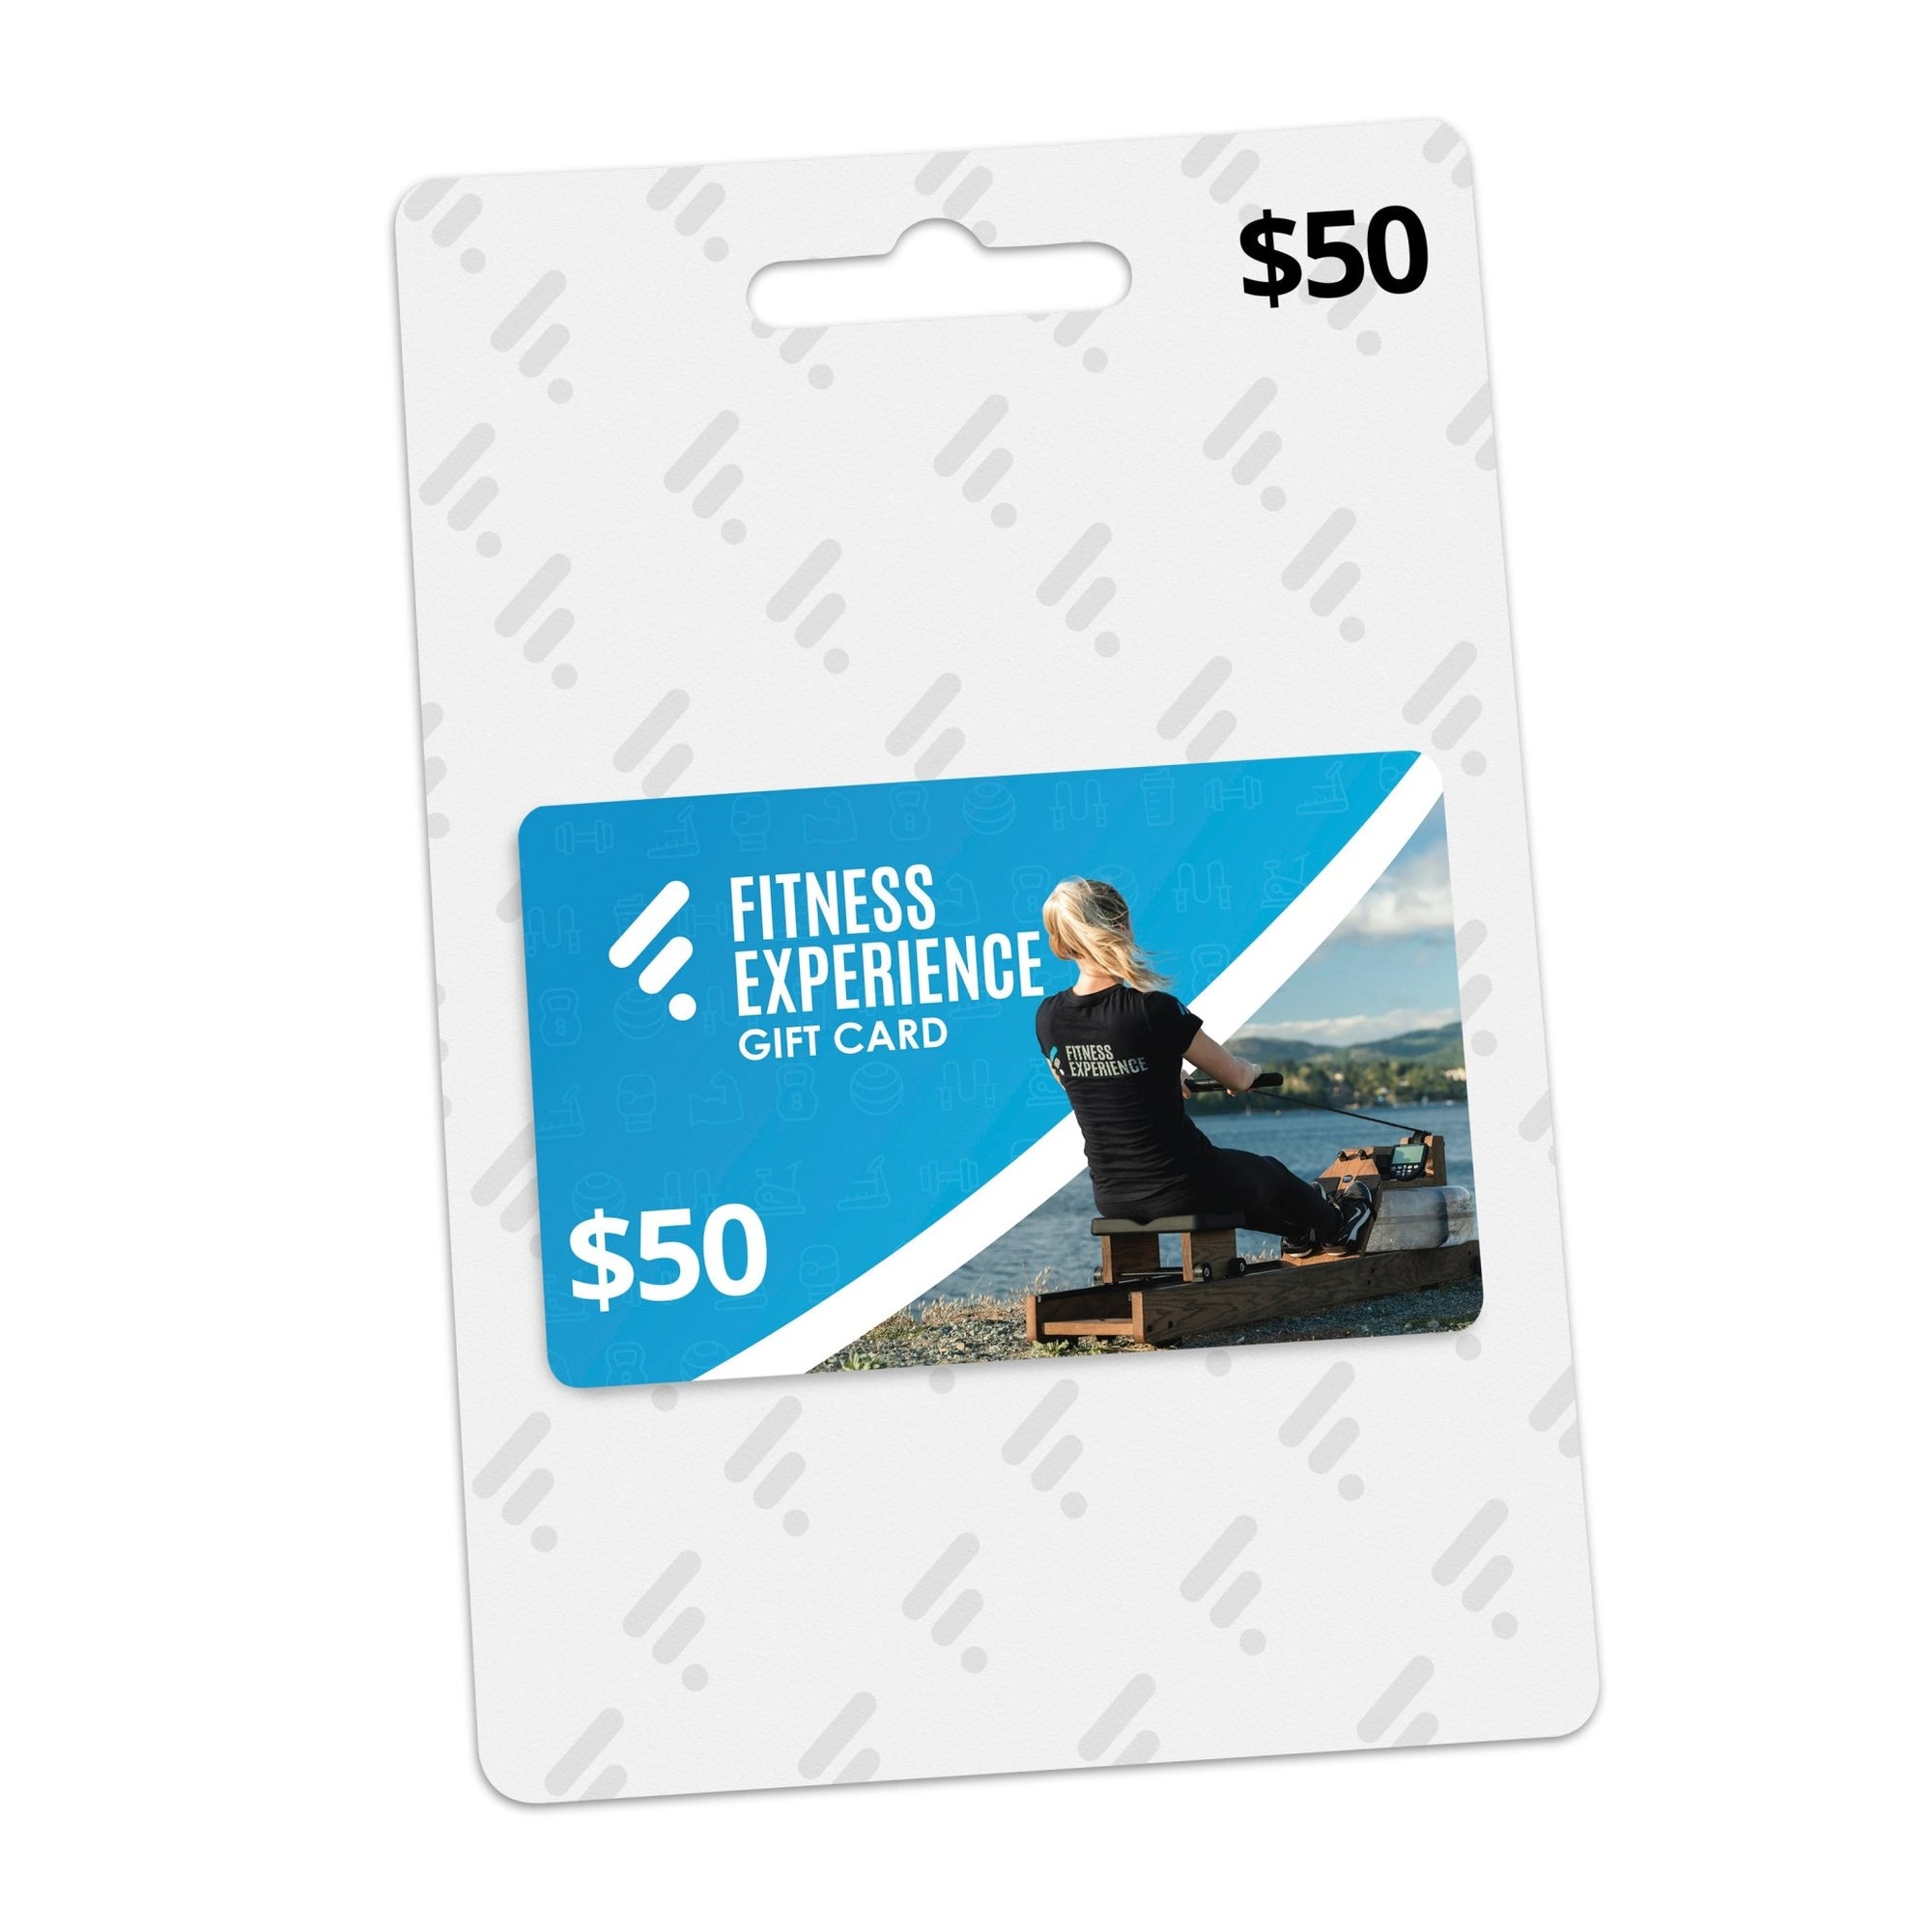 Fitness Experience $50 giftcard - Fitness Experience